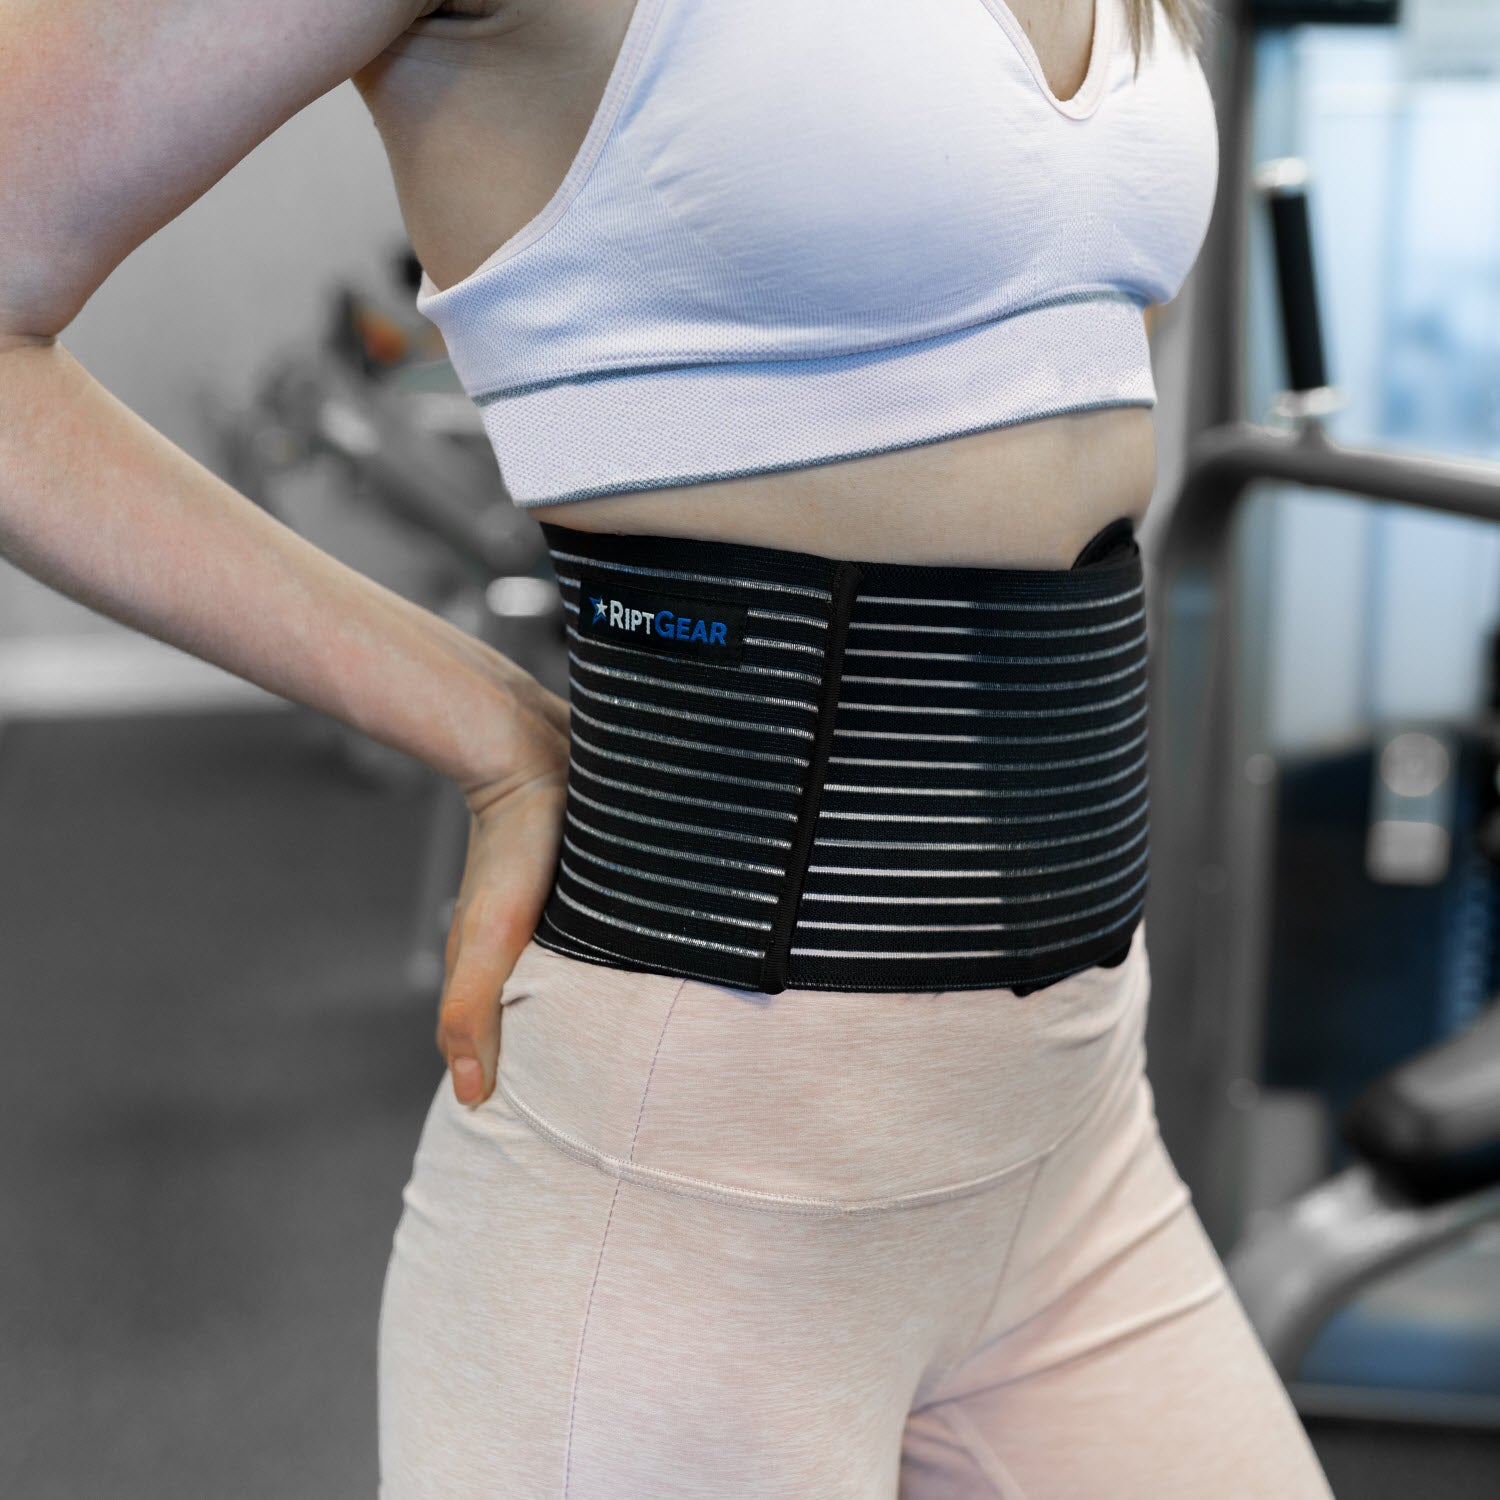 Hernia Belts and Support Belts - Abdo Empowered